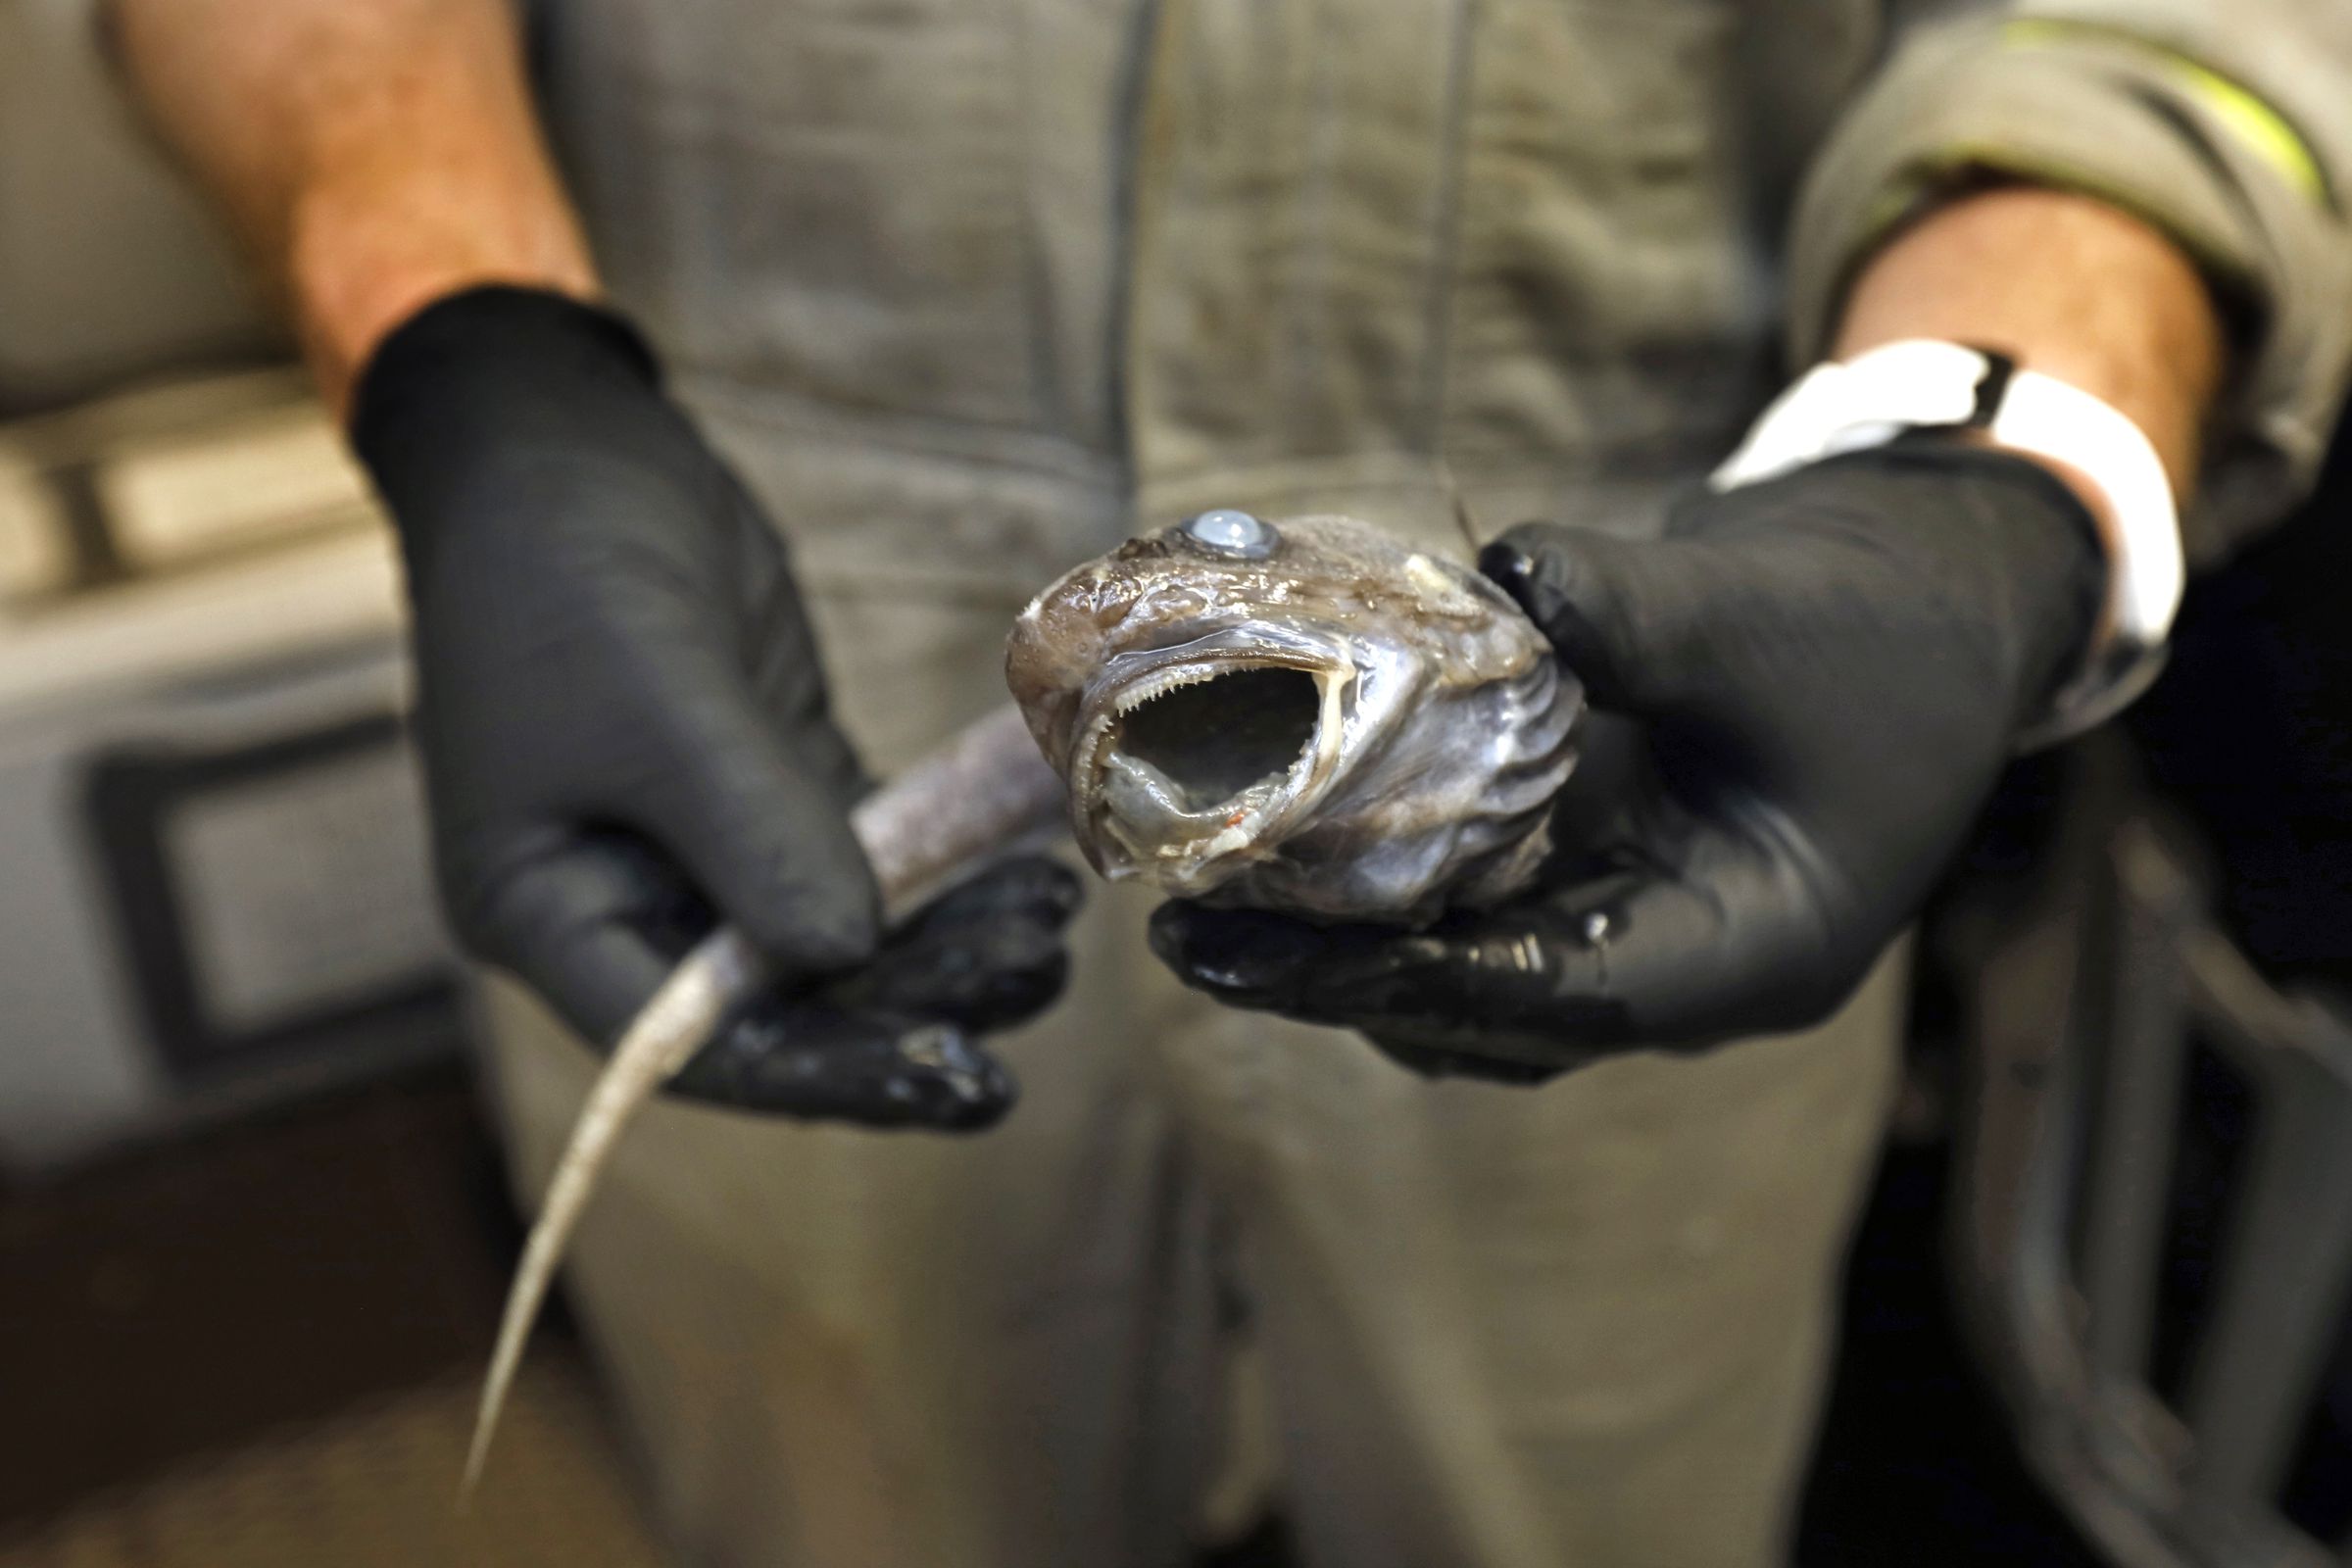 A close-up of hands wearing black gloves holding a fish with its mouth gaping open.